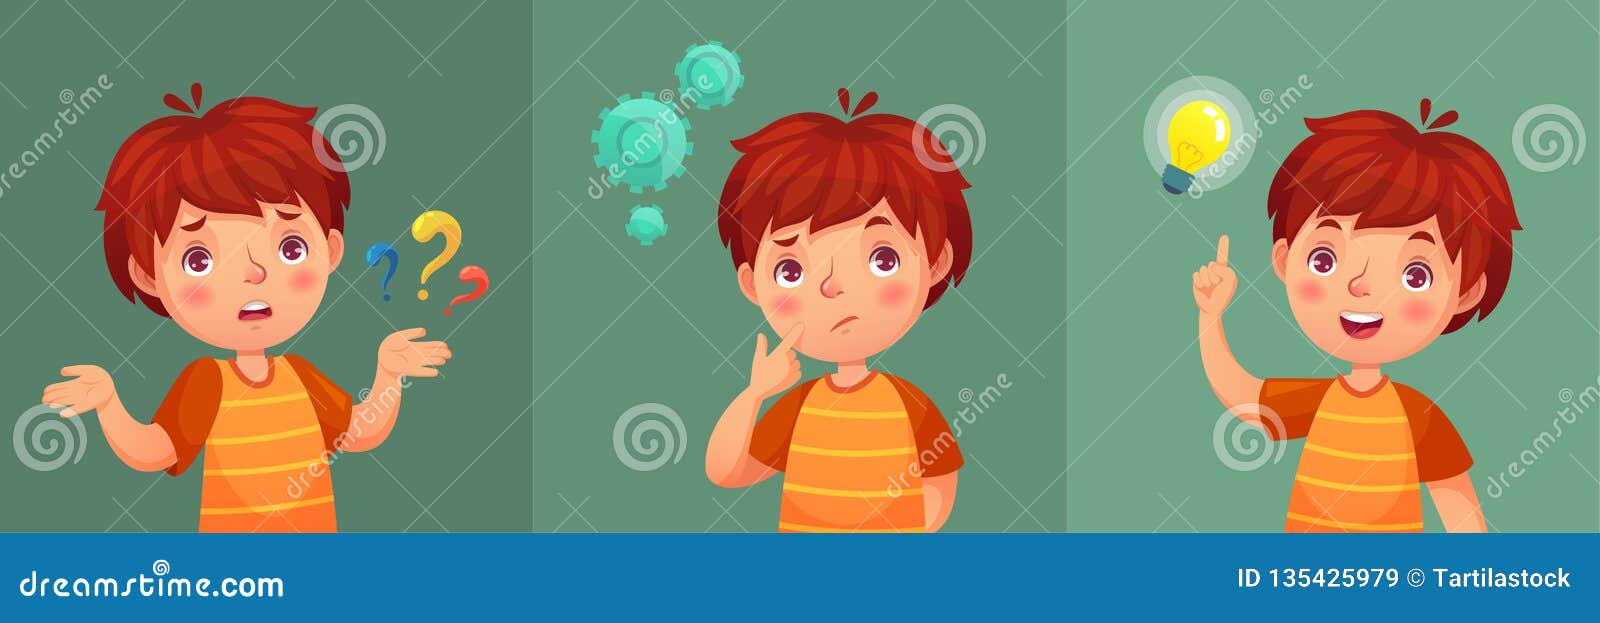 child question. thoughtful young boy ask question, confused kid and understand or found answer cartoon  portrait